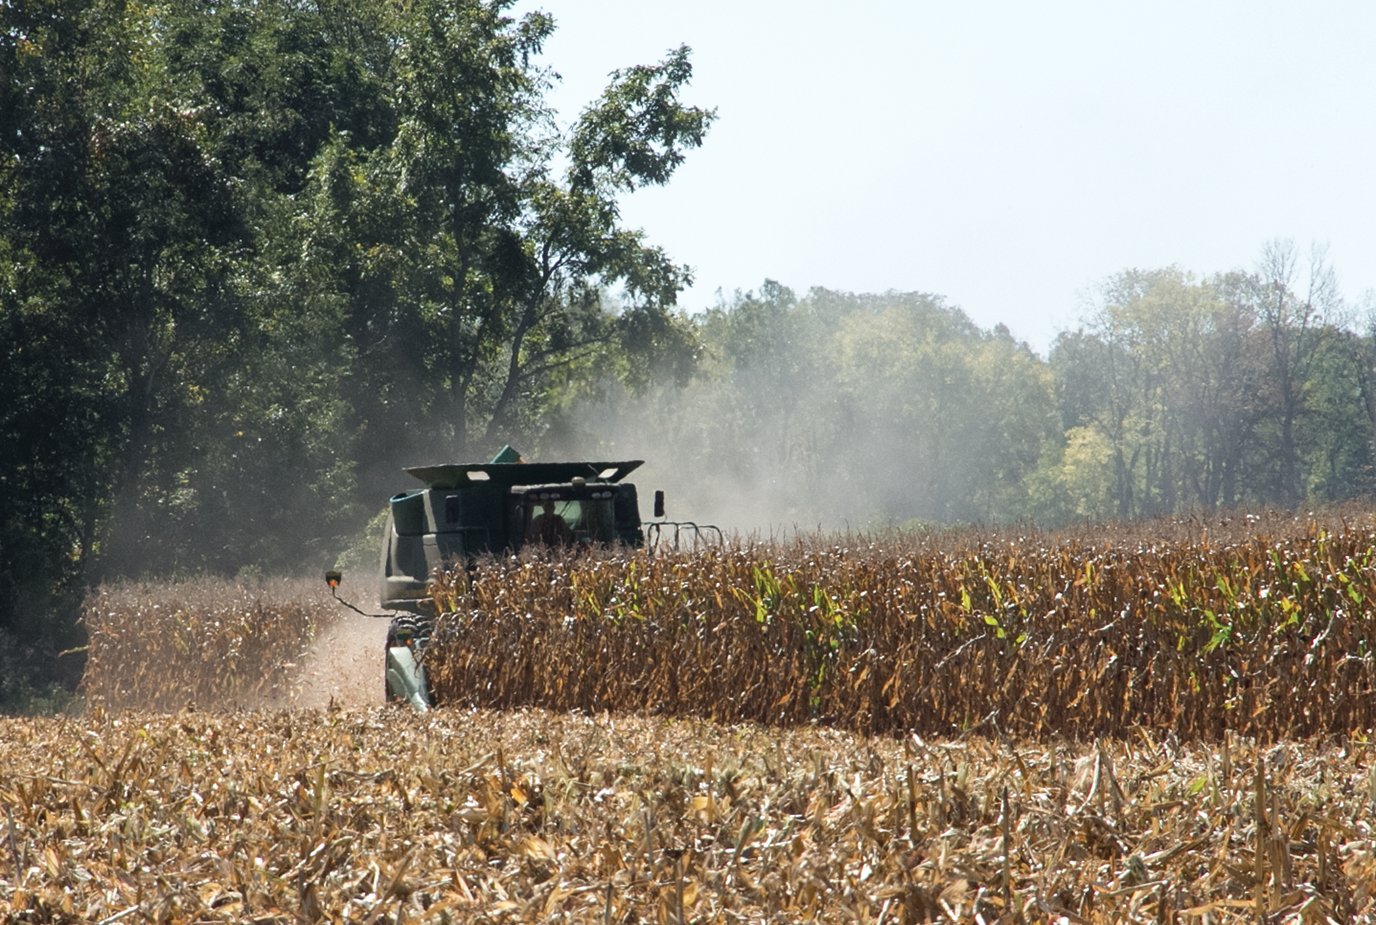 A farmer harvests his corn field near County Road 150 South.